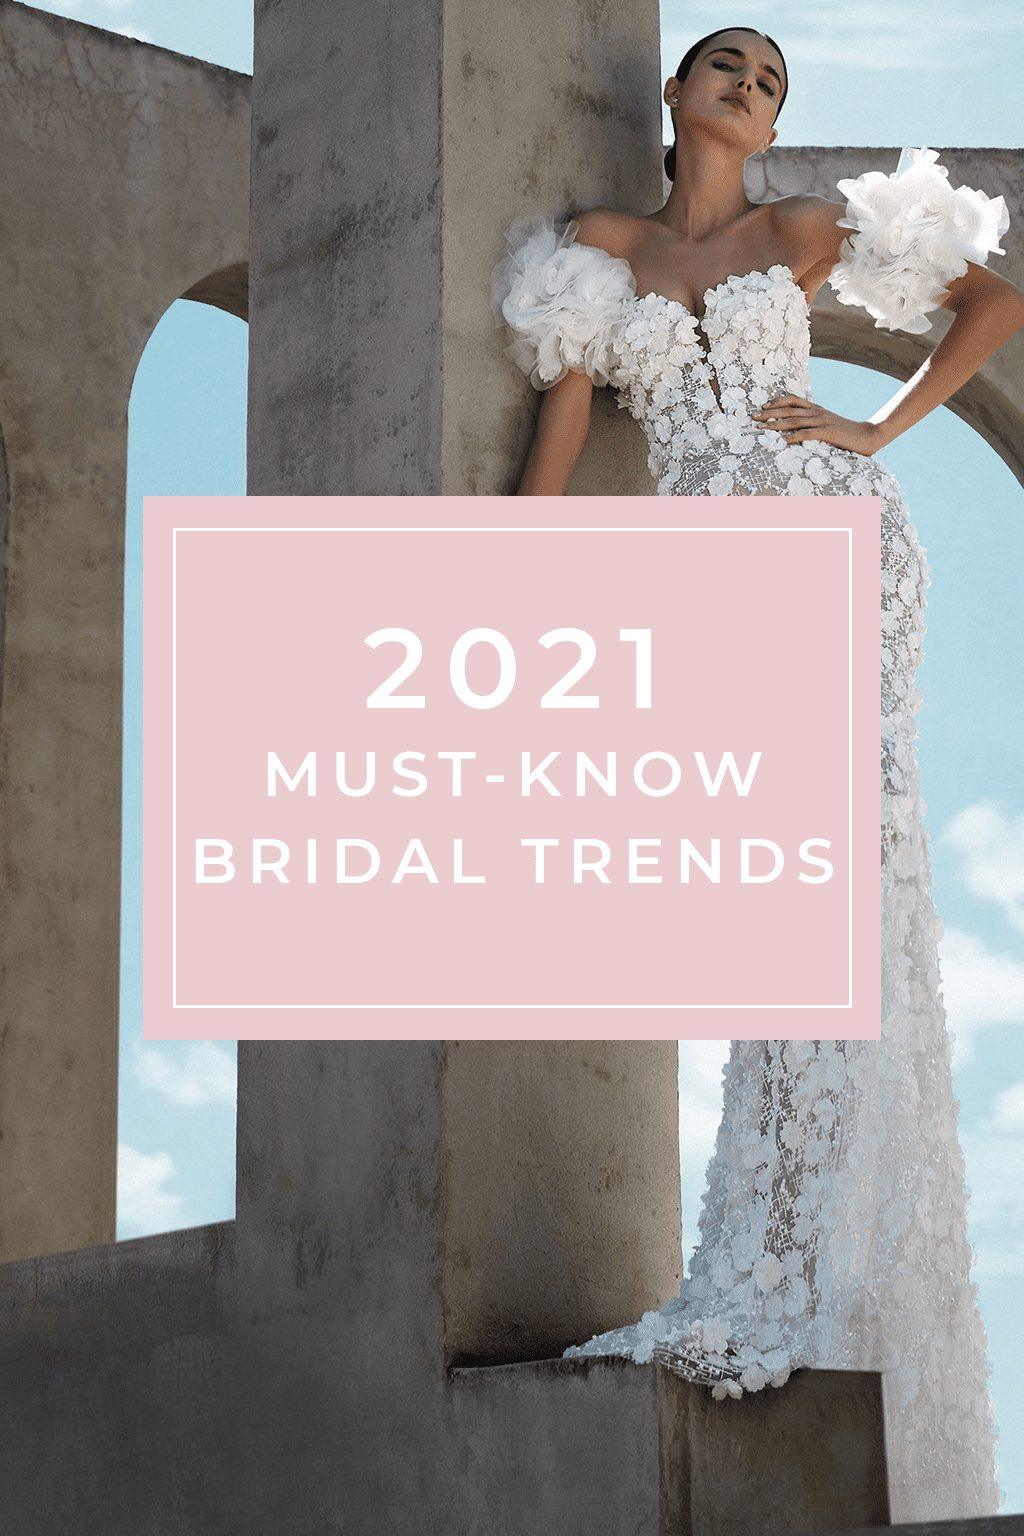 Wedding Dress Styles And Trends - What We’re Going To See More Of In 2021 - White Lily Couture